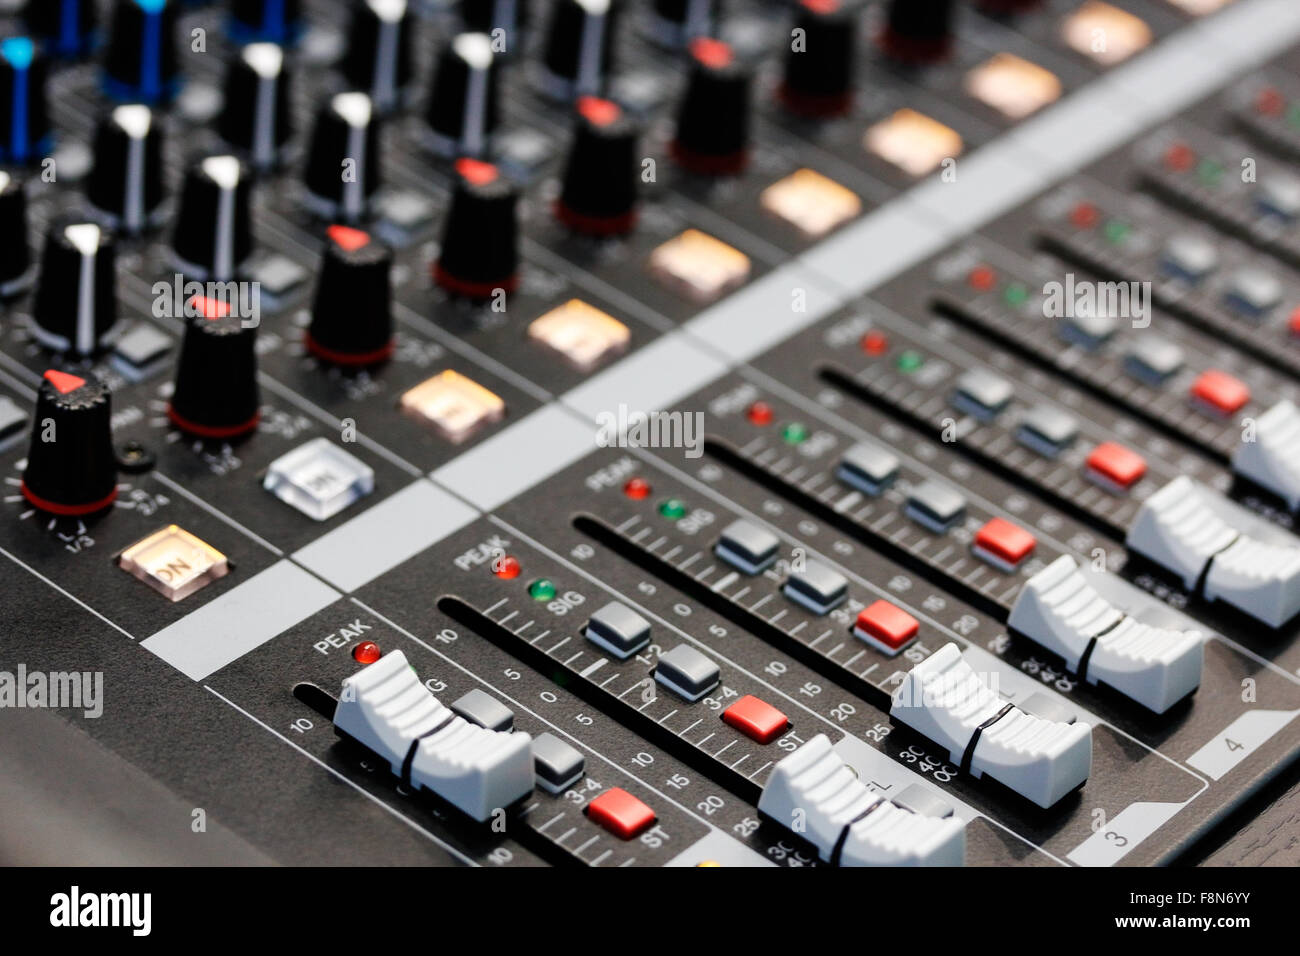 Sound mixing desk. Close up view. Shallow depth of field. Stock Photo